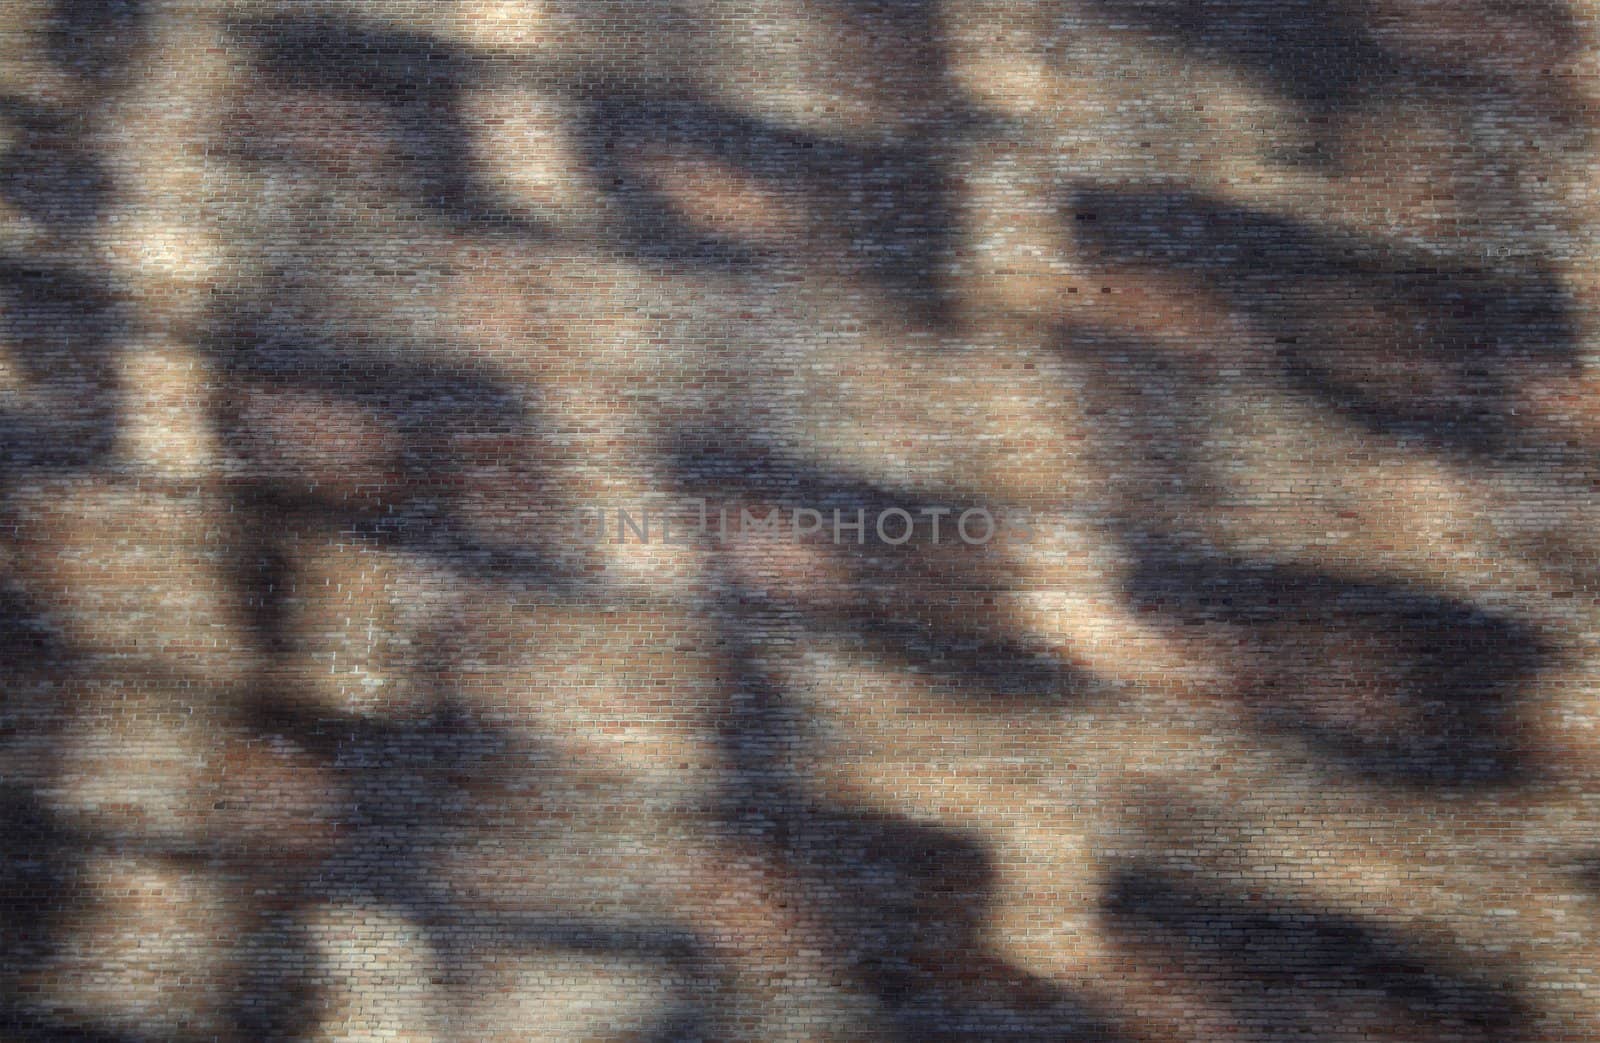 Abstract shadows on a brick wall � reflections of windows in the sunlight.